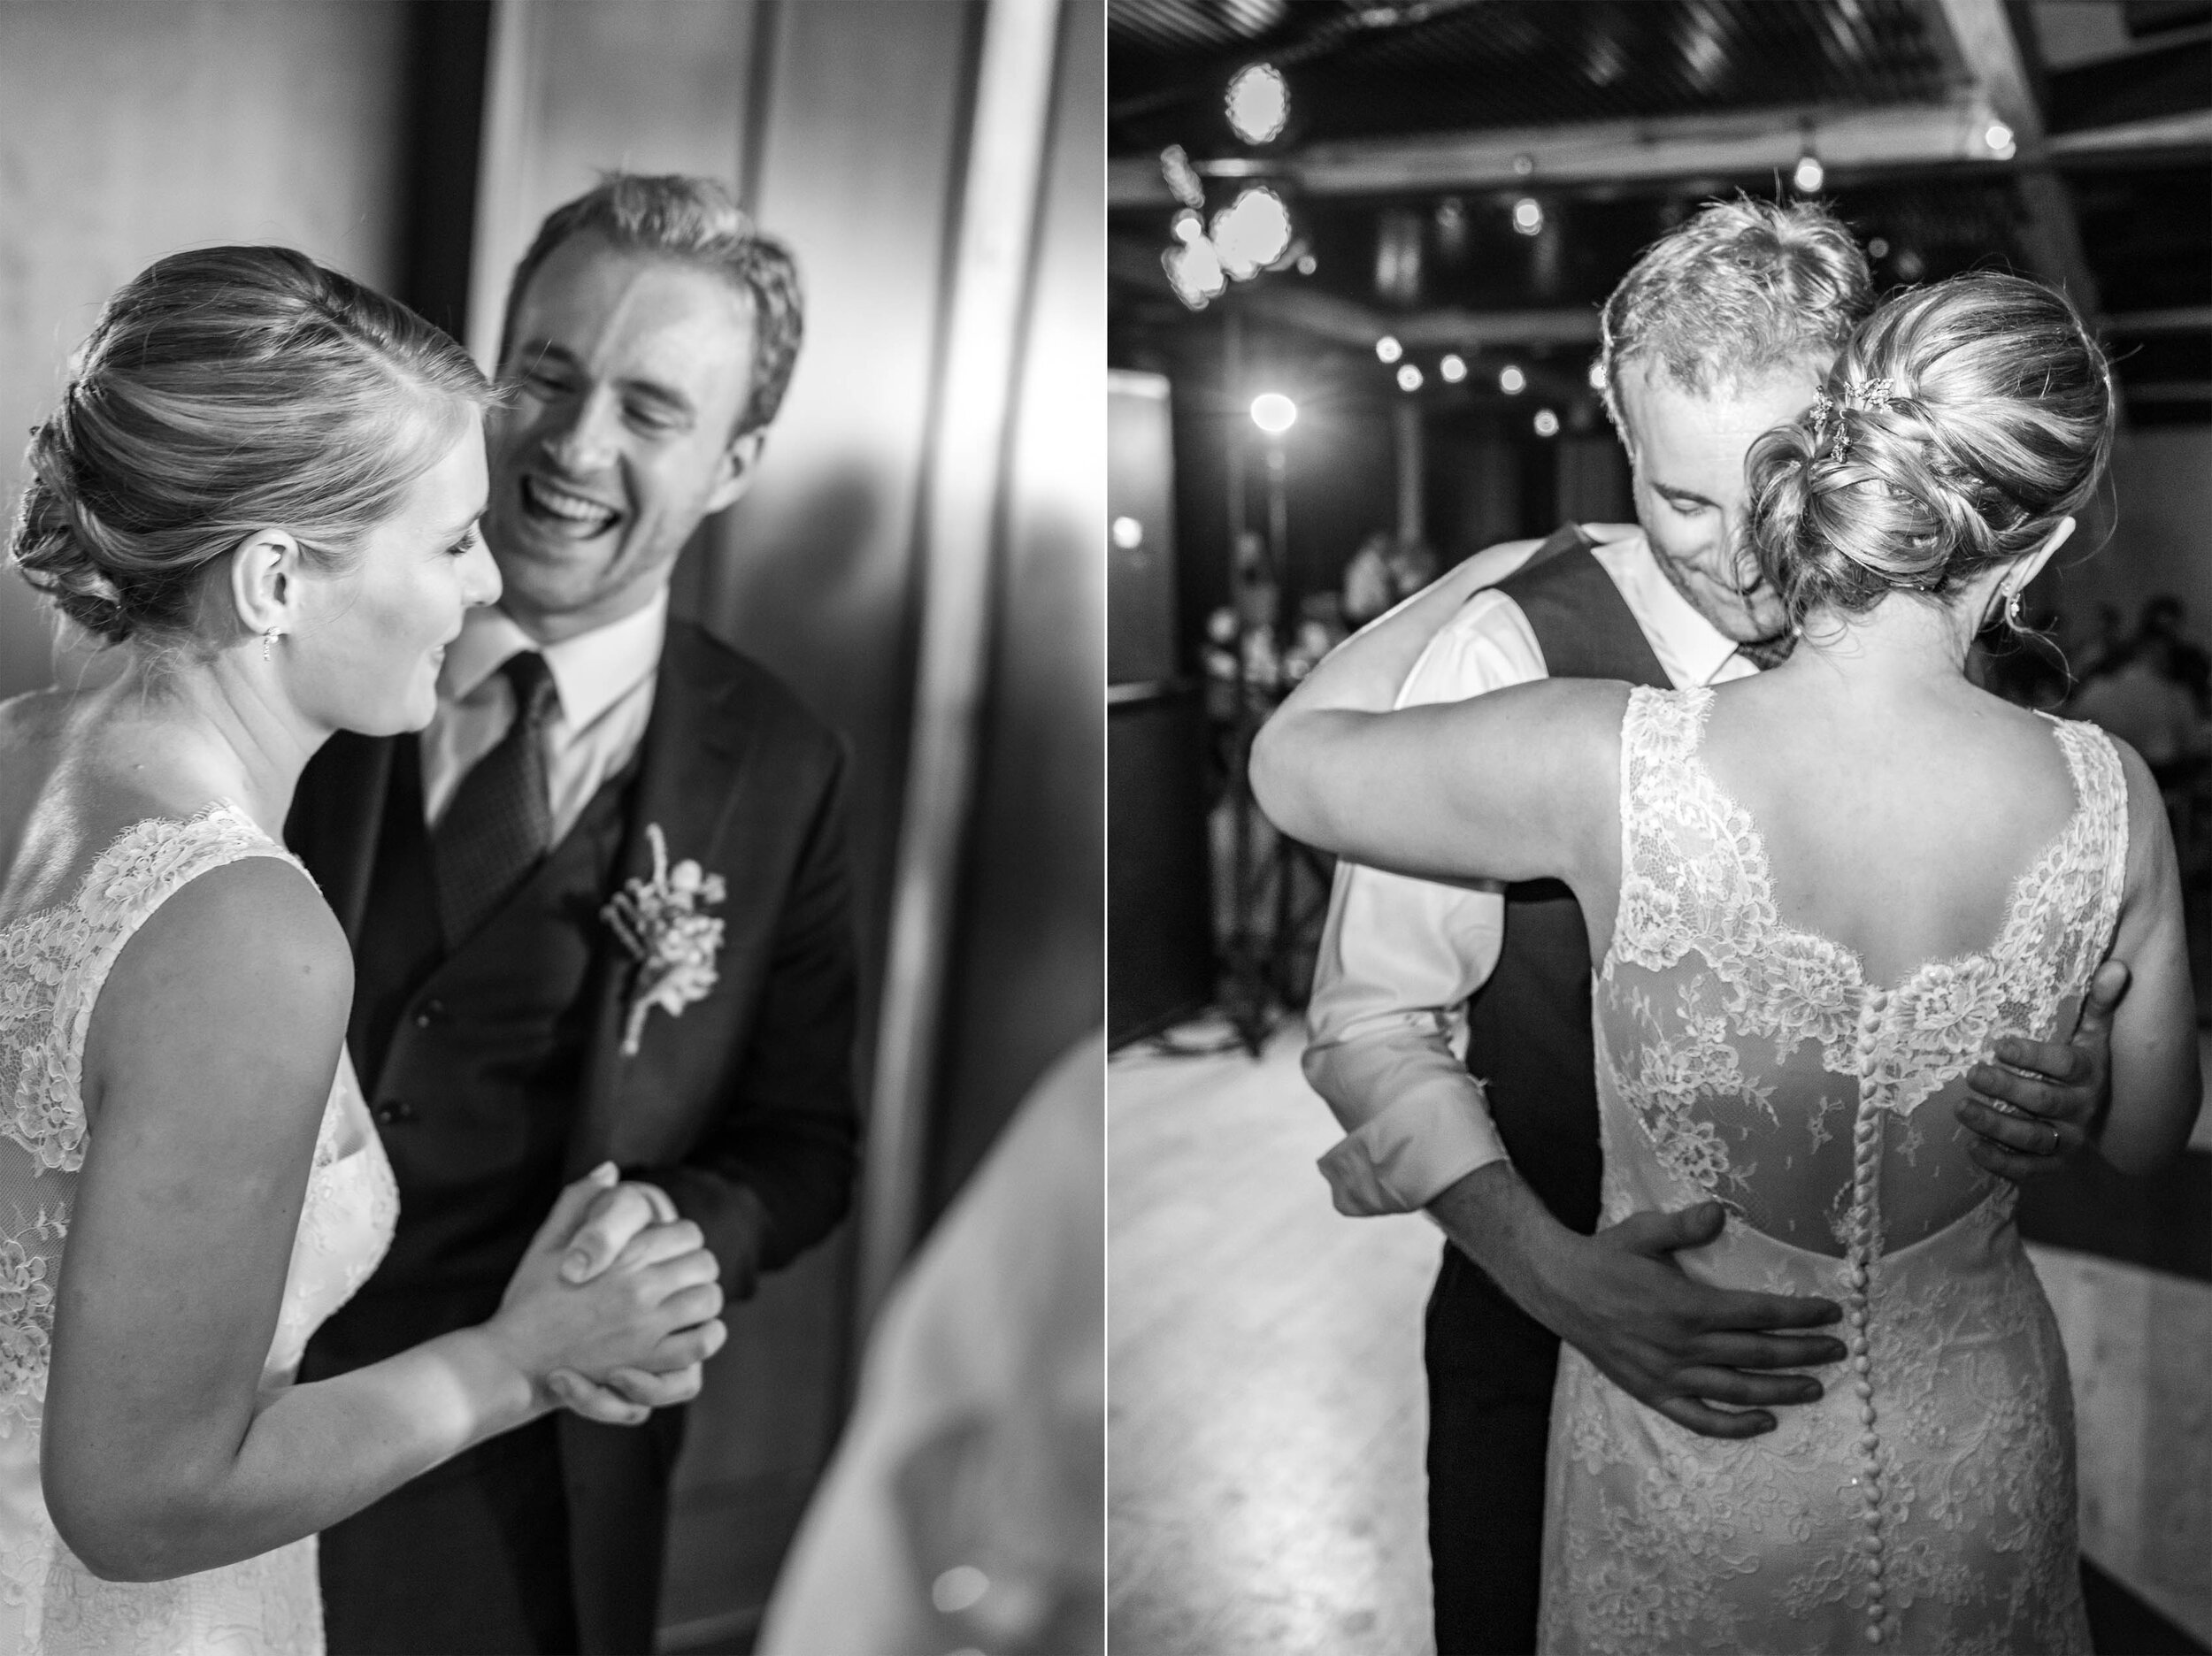 Romantic black and white photos on District Winery dance floor